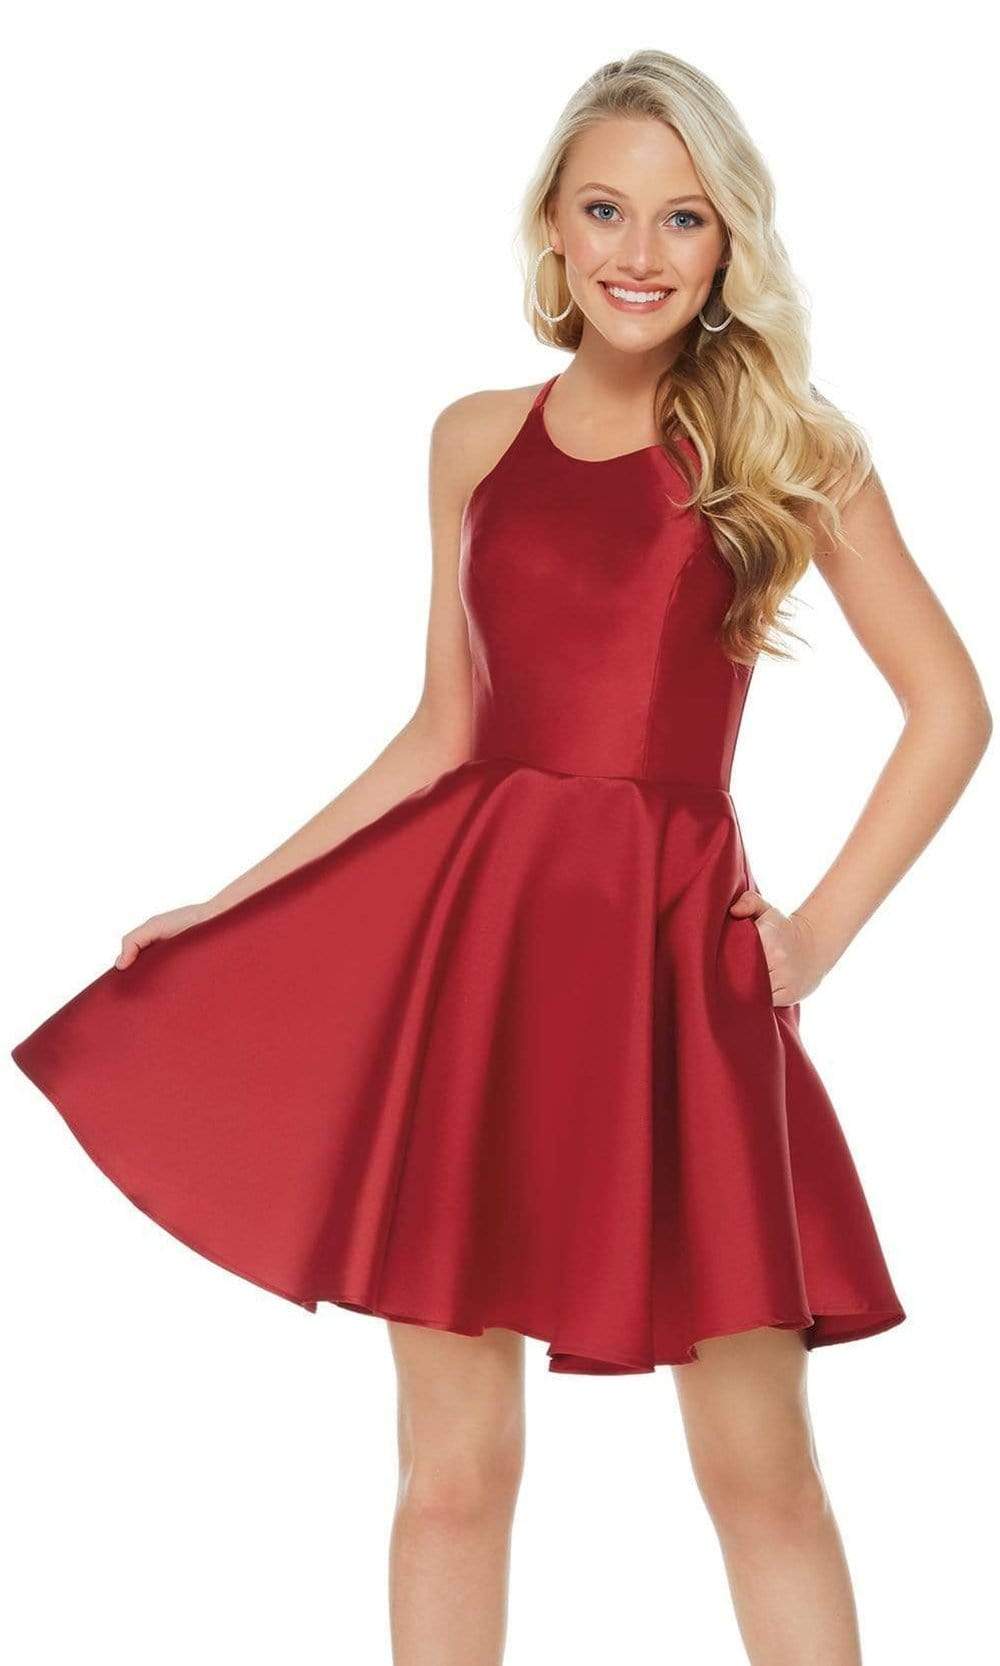 Alyce Paris - 3703 Strappy Fitted Halter Cocktail Dress Cocktail Dresses 00 / Red